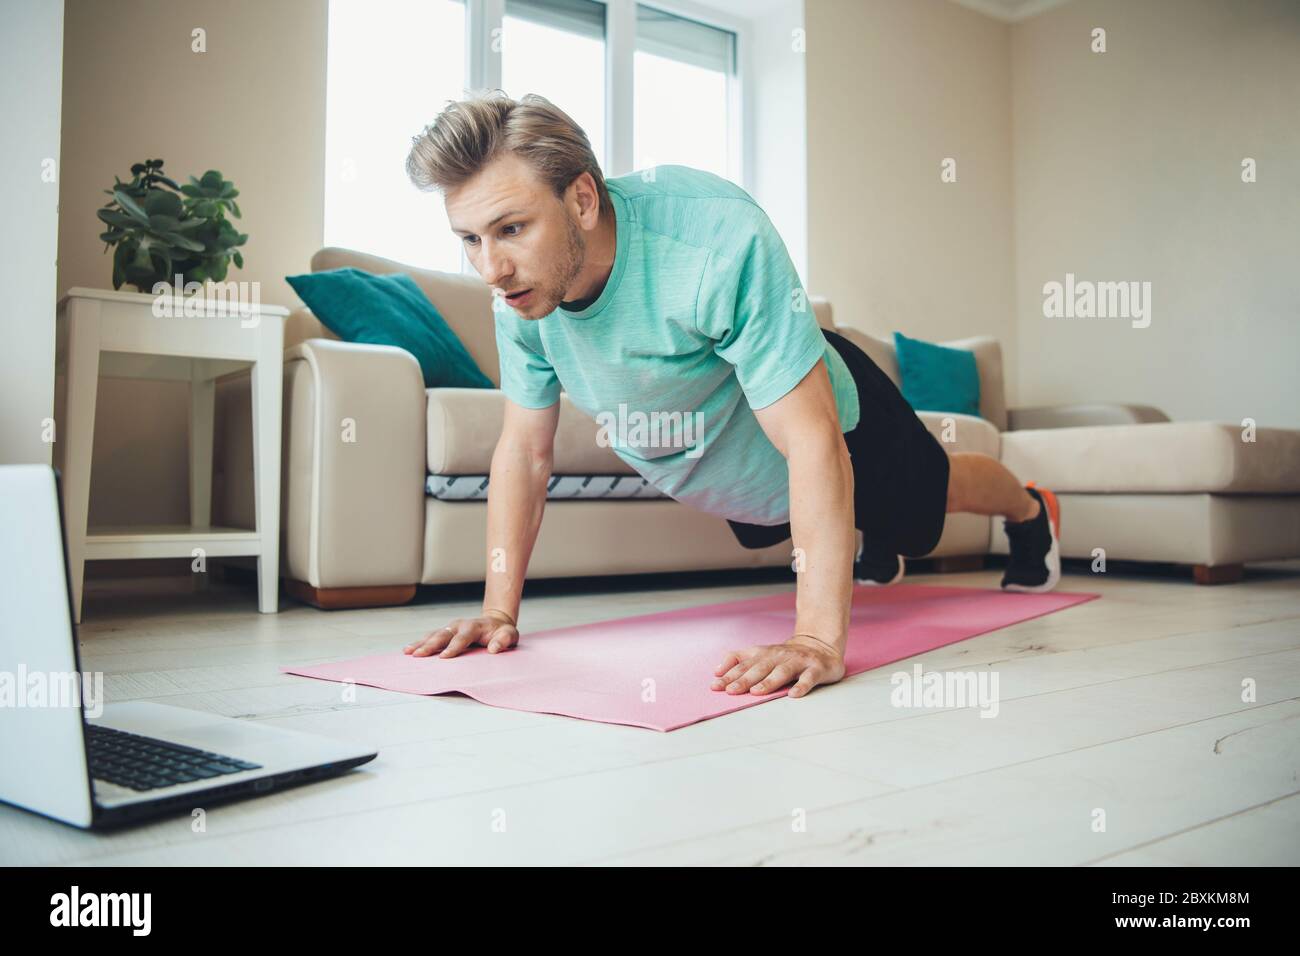 Blonde caucasian man with bristle doing push-ups on the floor using a laptop Stock Photo